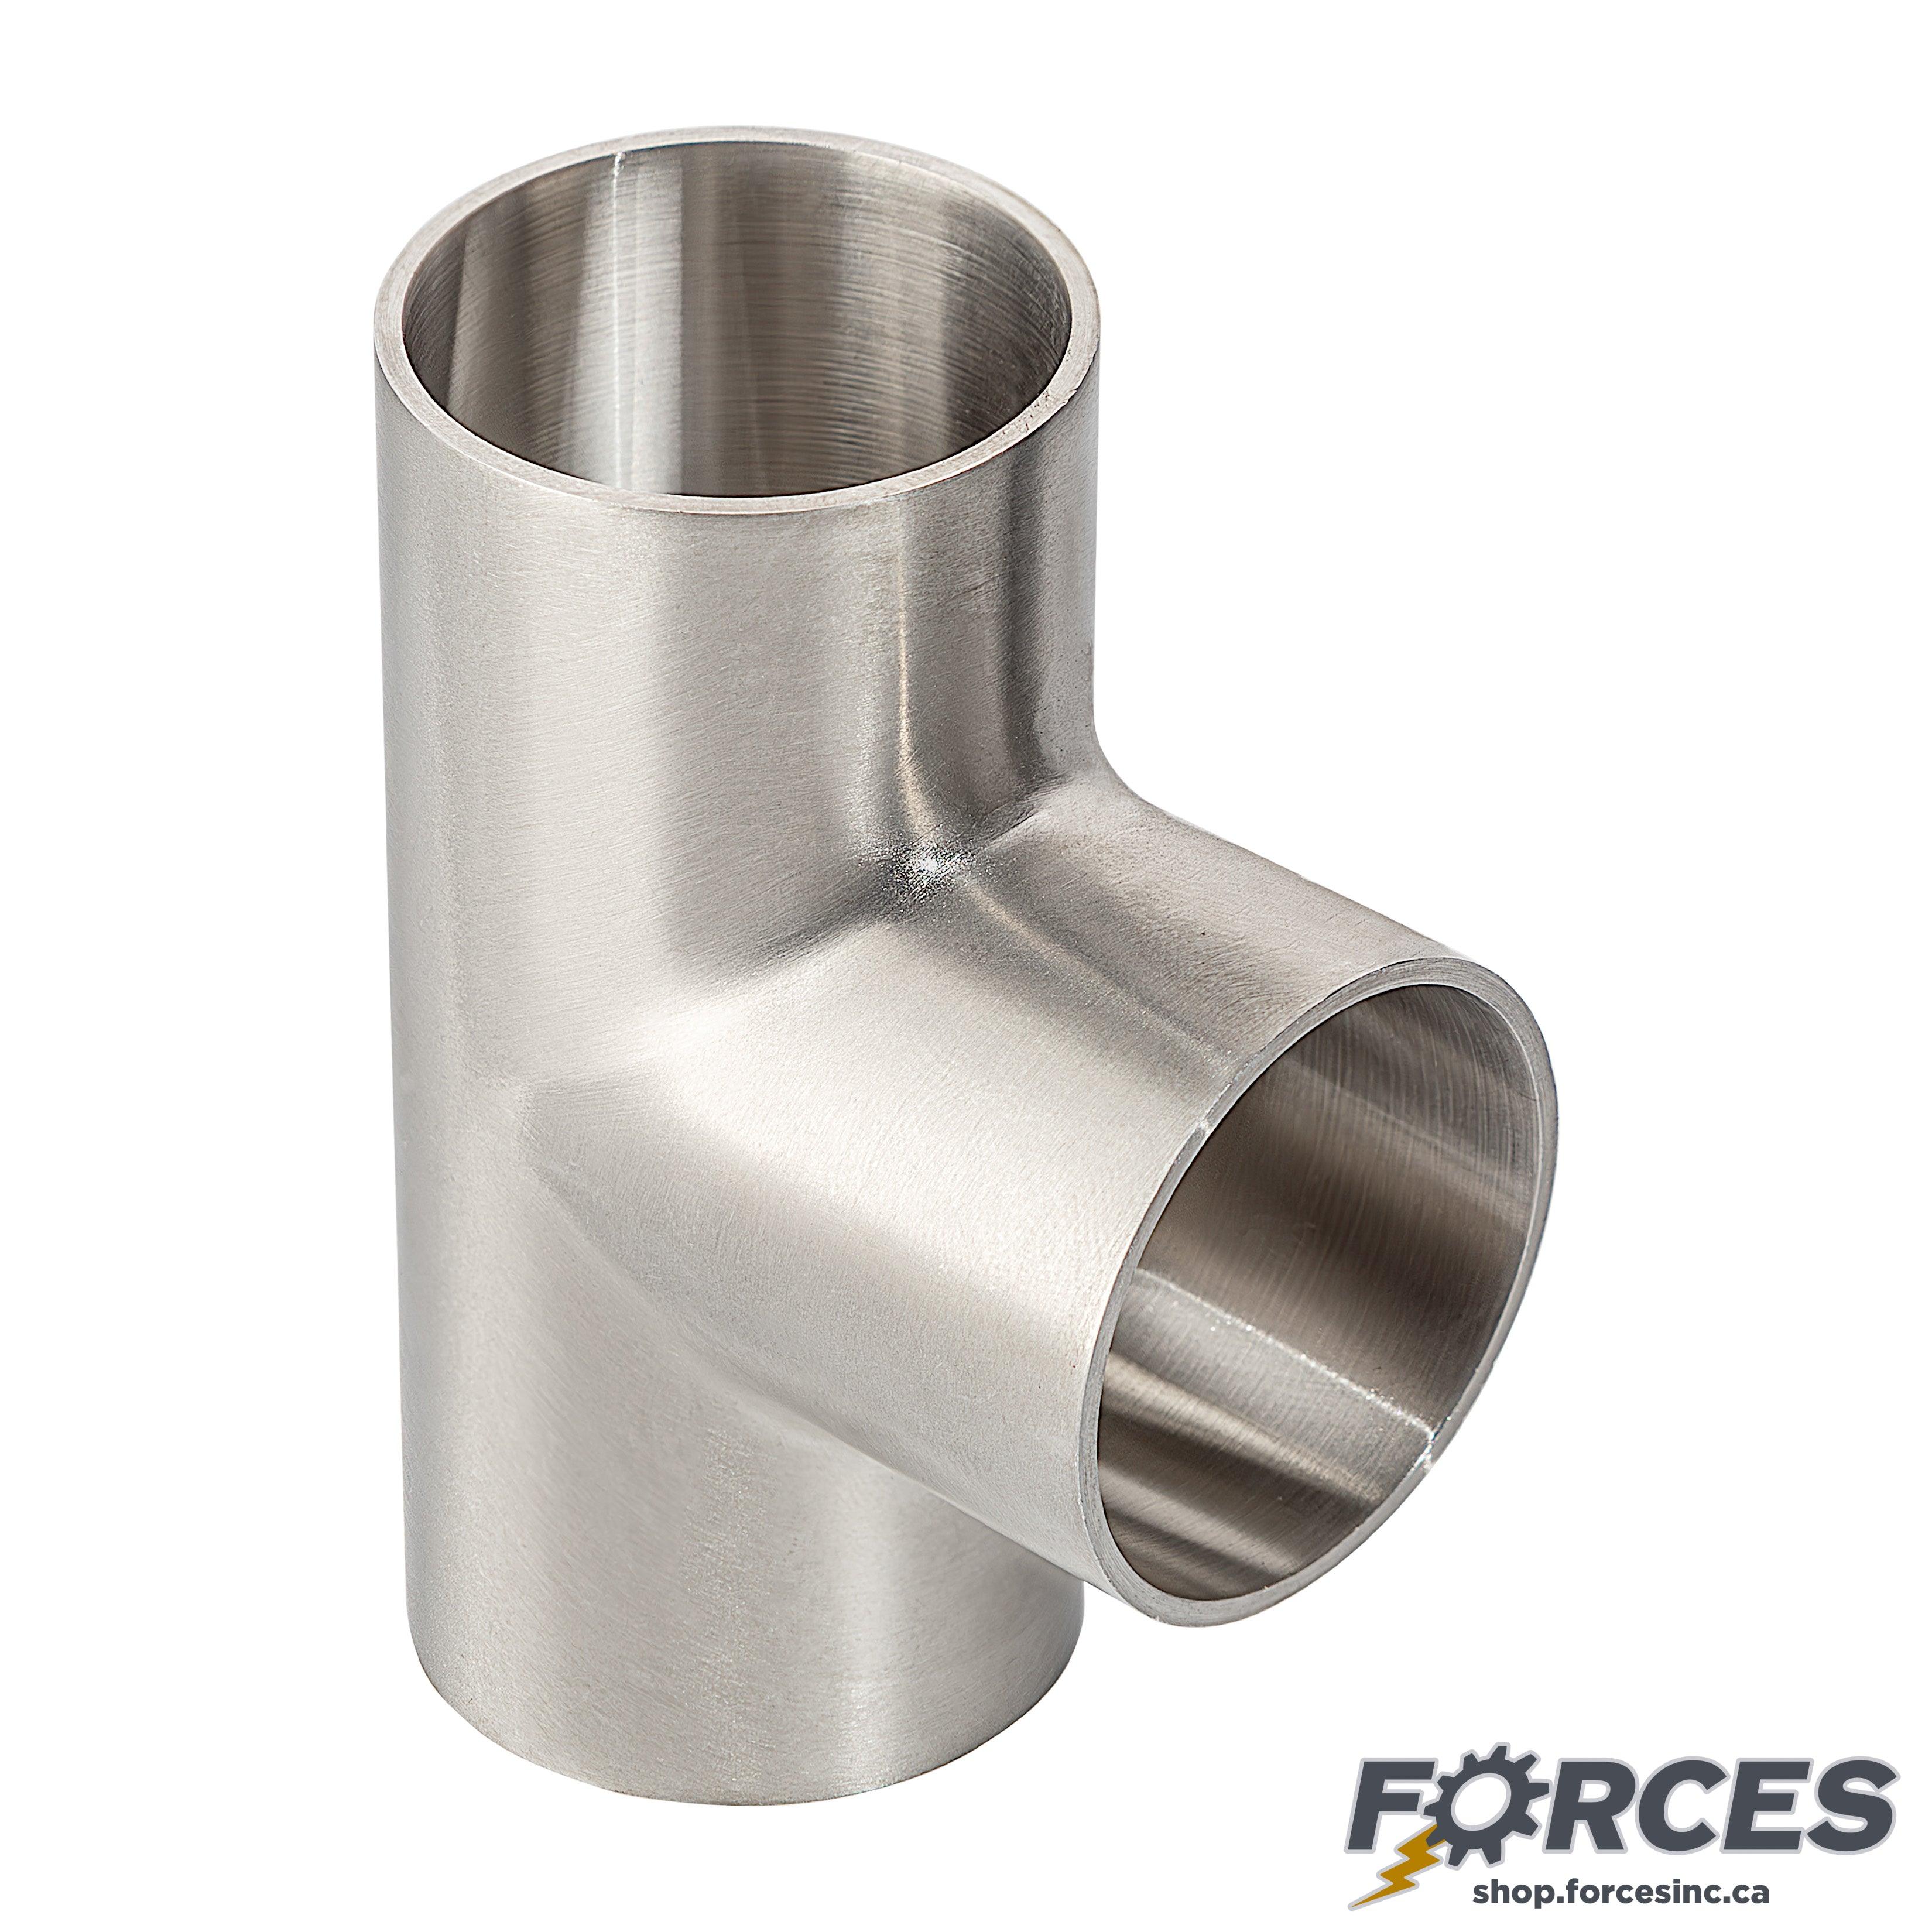 3" Butt Weld Short Tee - Stainless Steel 316 - Forces Inc